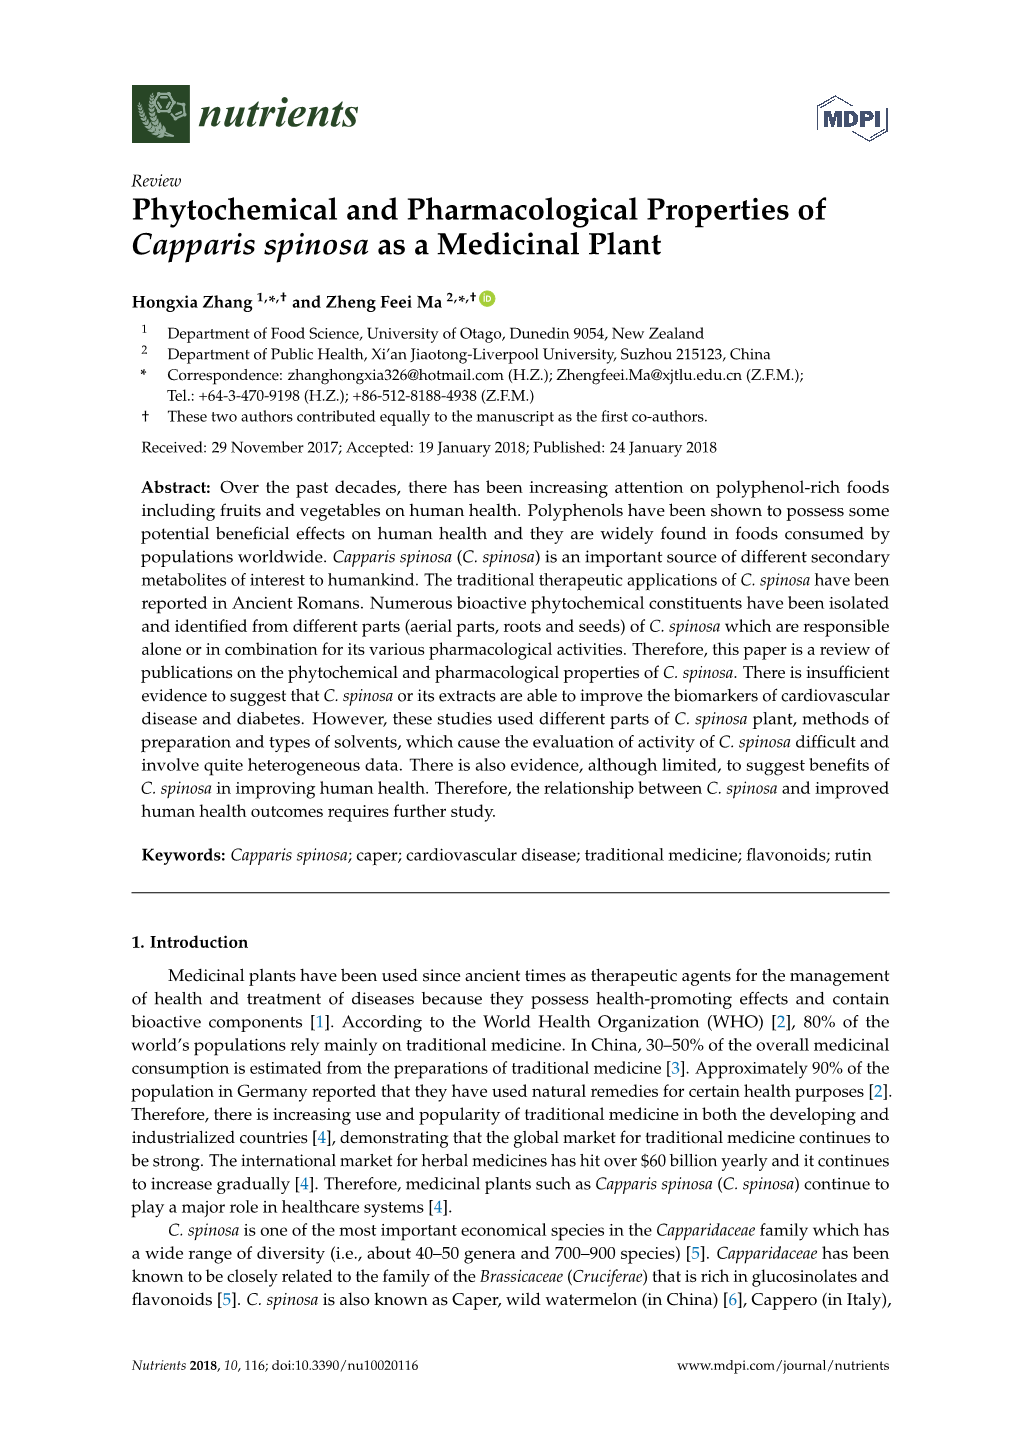 Phytochemical and Pharmacological Properties of Capparis Spinosa As a Medicinal Plant